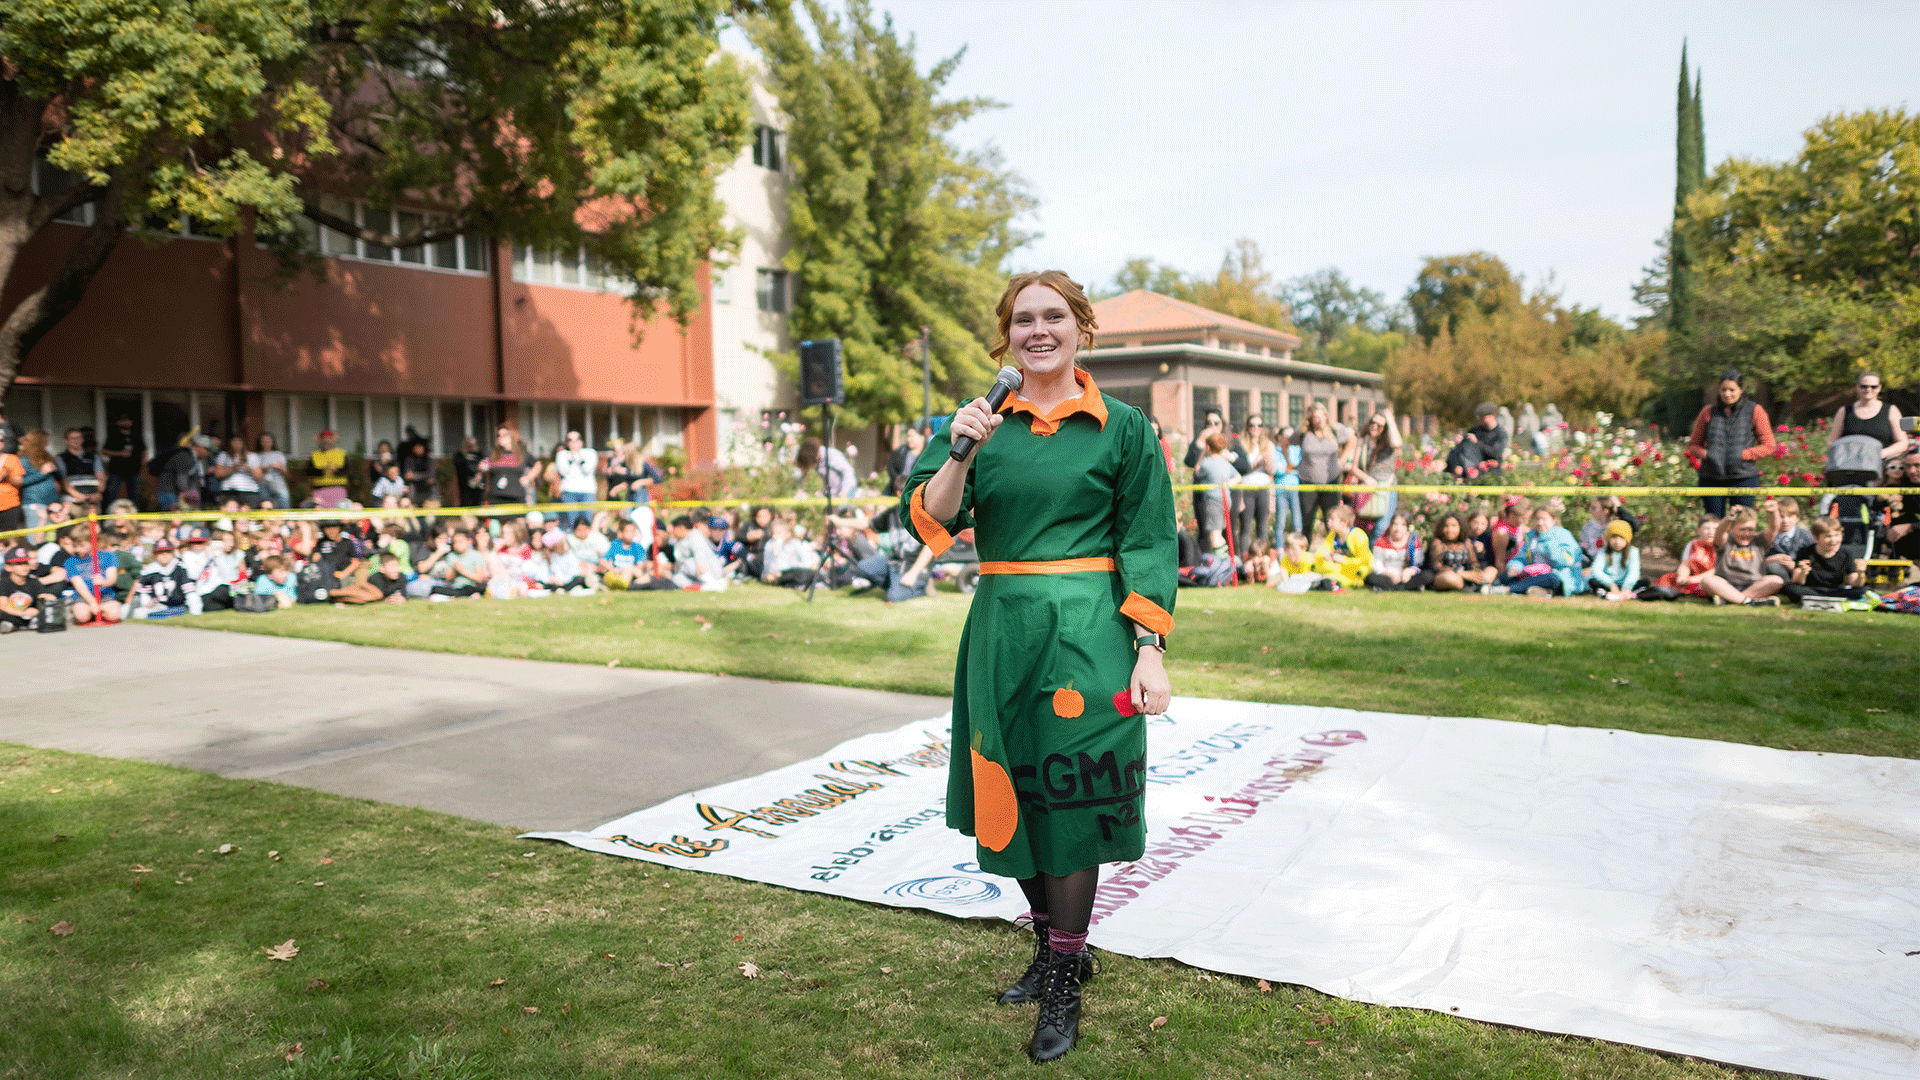 Physics faculty Kendall Hall portrays Ms. Frizzle as local elementary school students watch the Society of Physics students drop pumpkins from a lift during the Annual SPS Pumpkin drop on Monday, October 31, 2022 in Chico, Calif.
